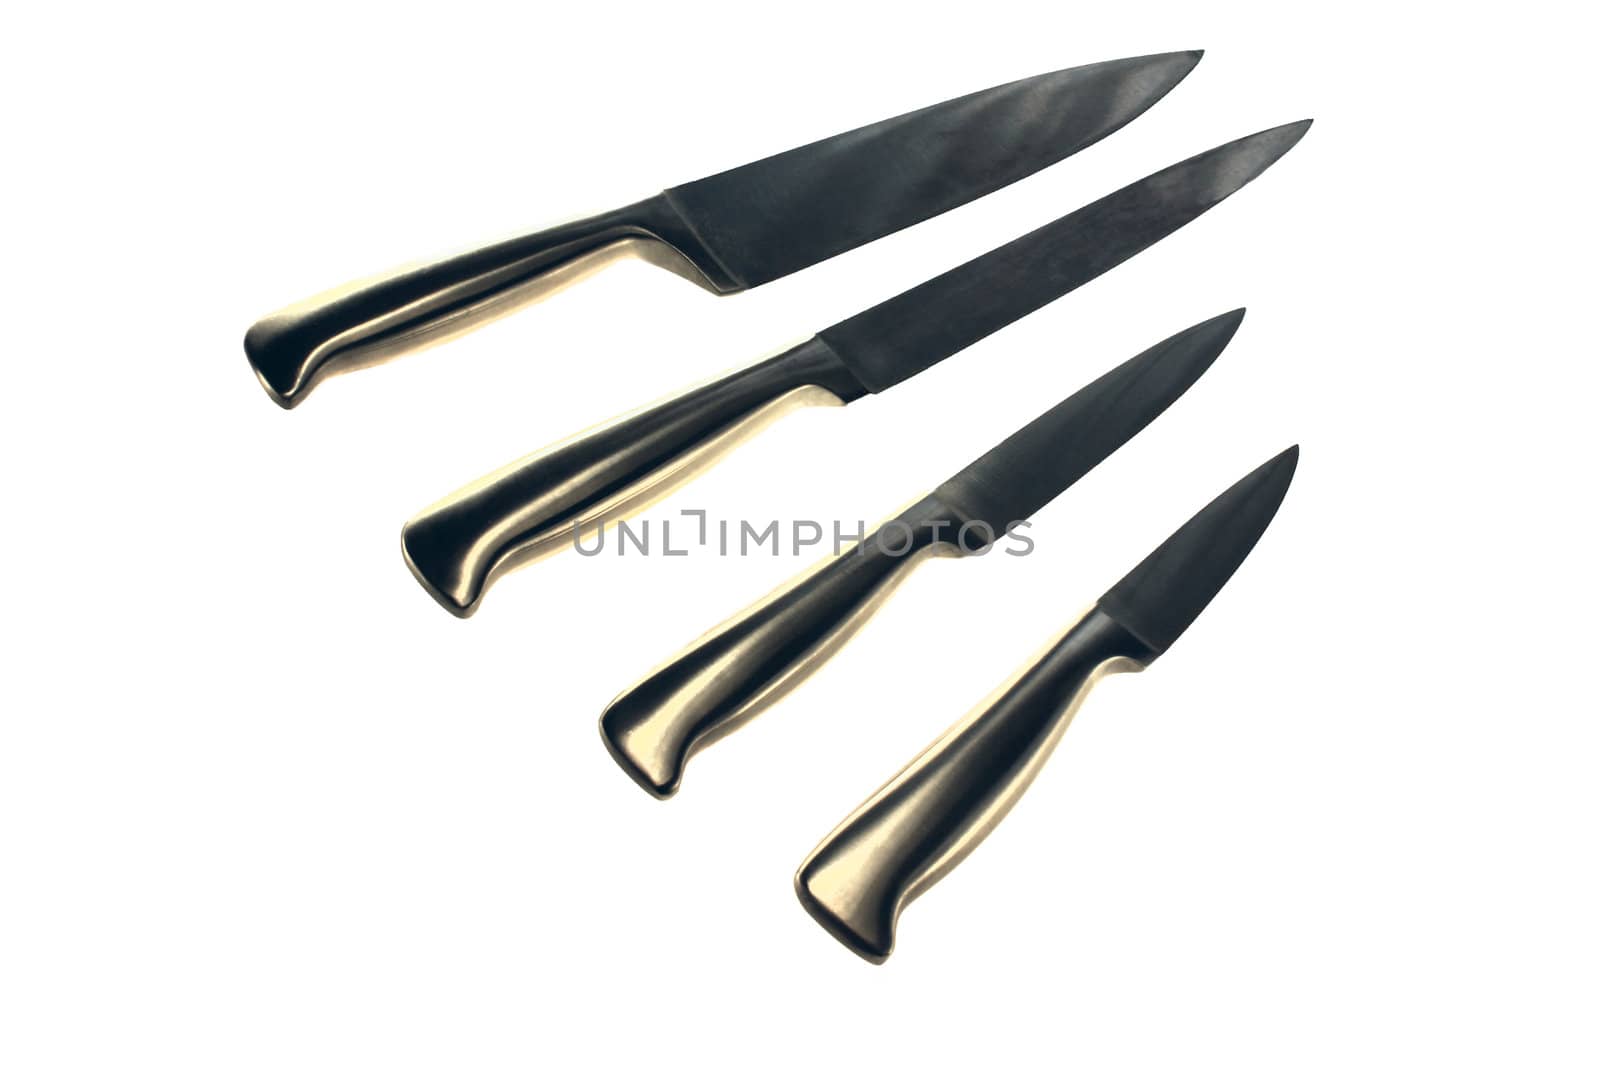 four steel knives om the white background